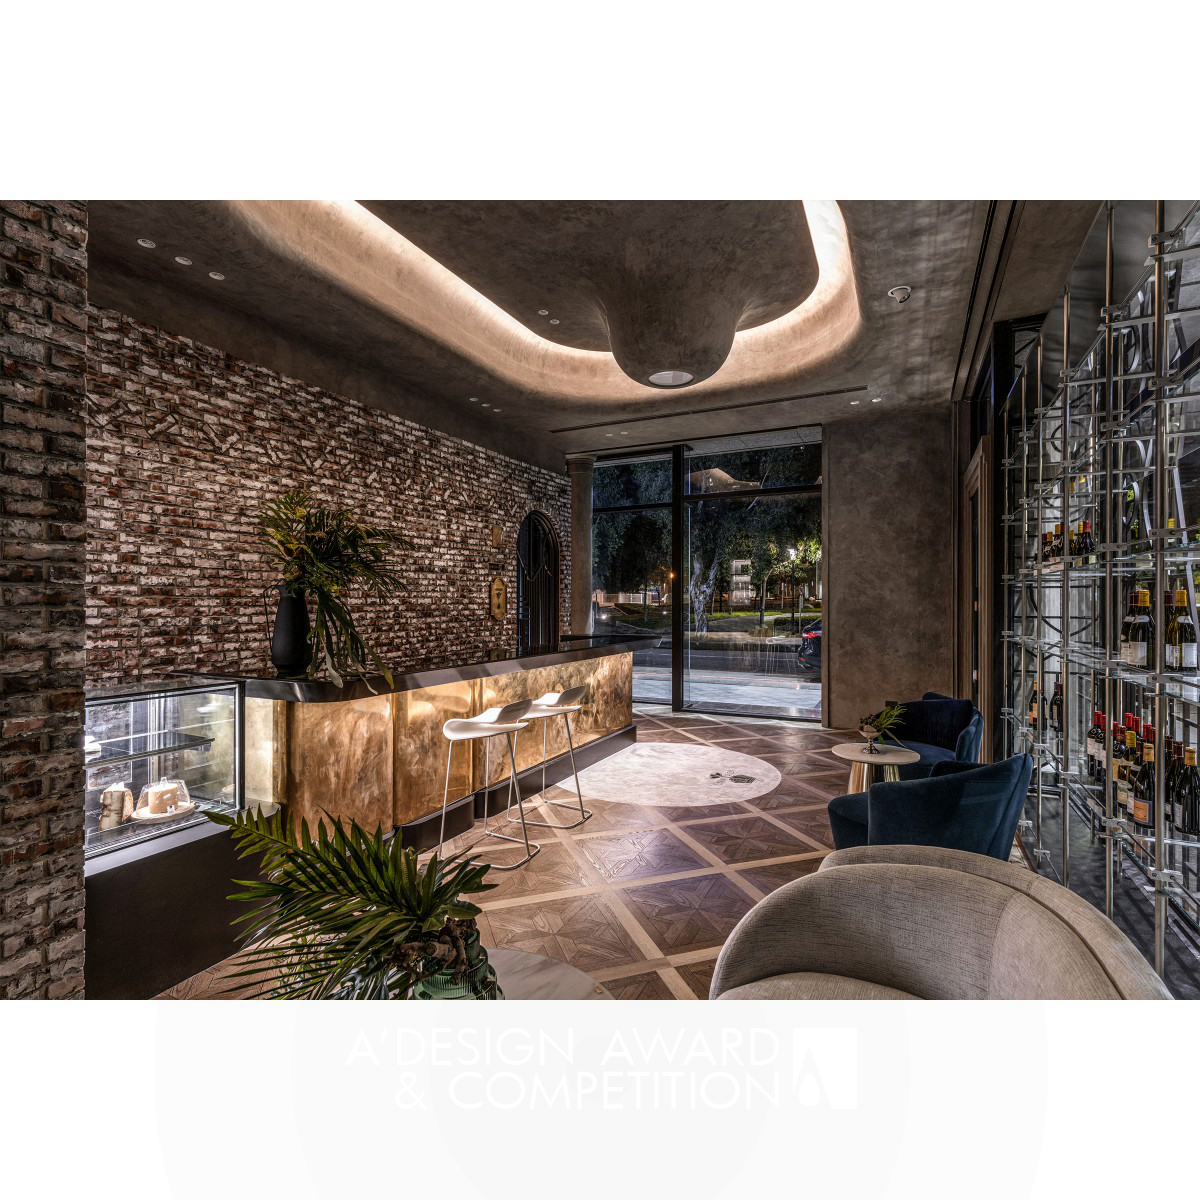 Champion: A Wine Cave by Hsin Ting Weng